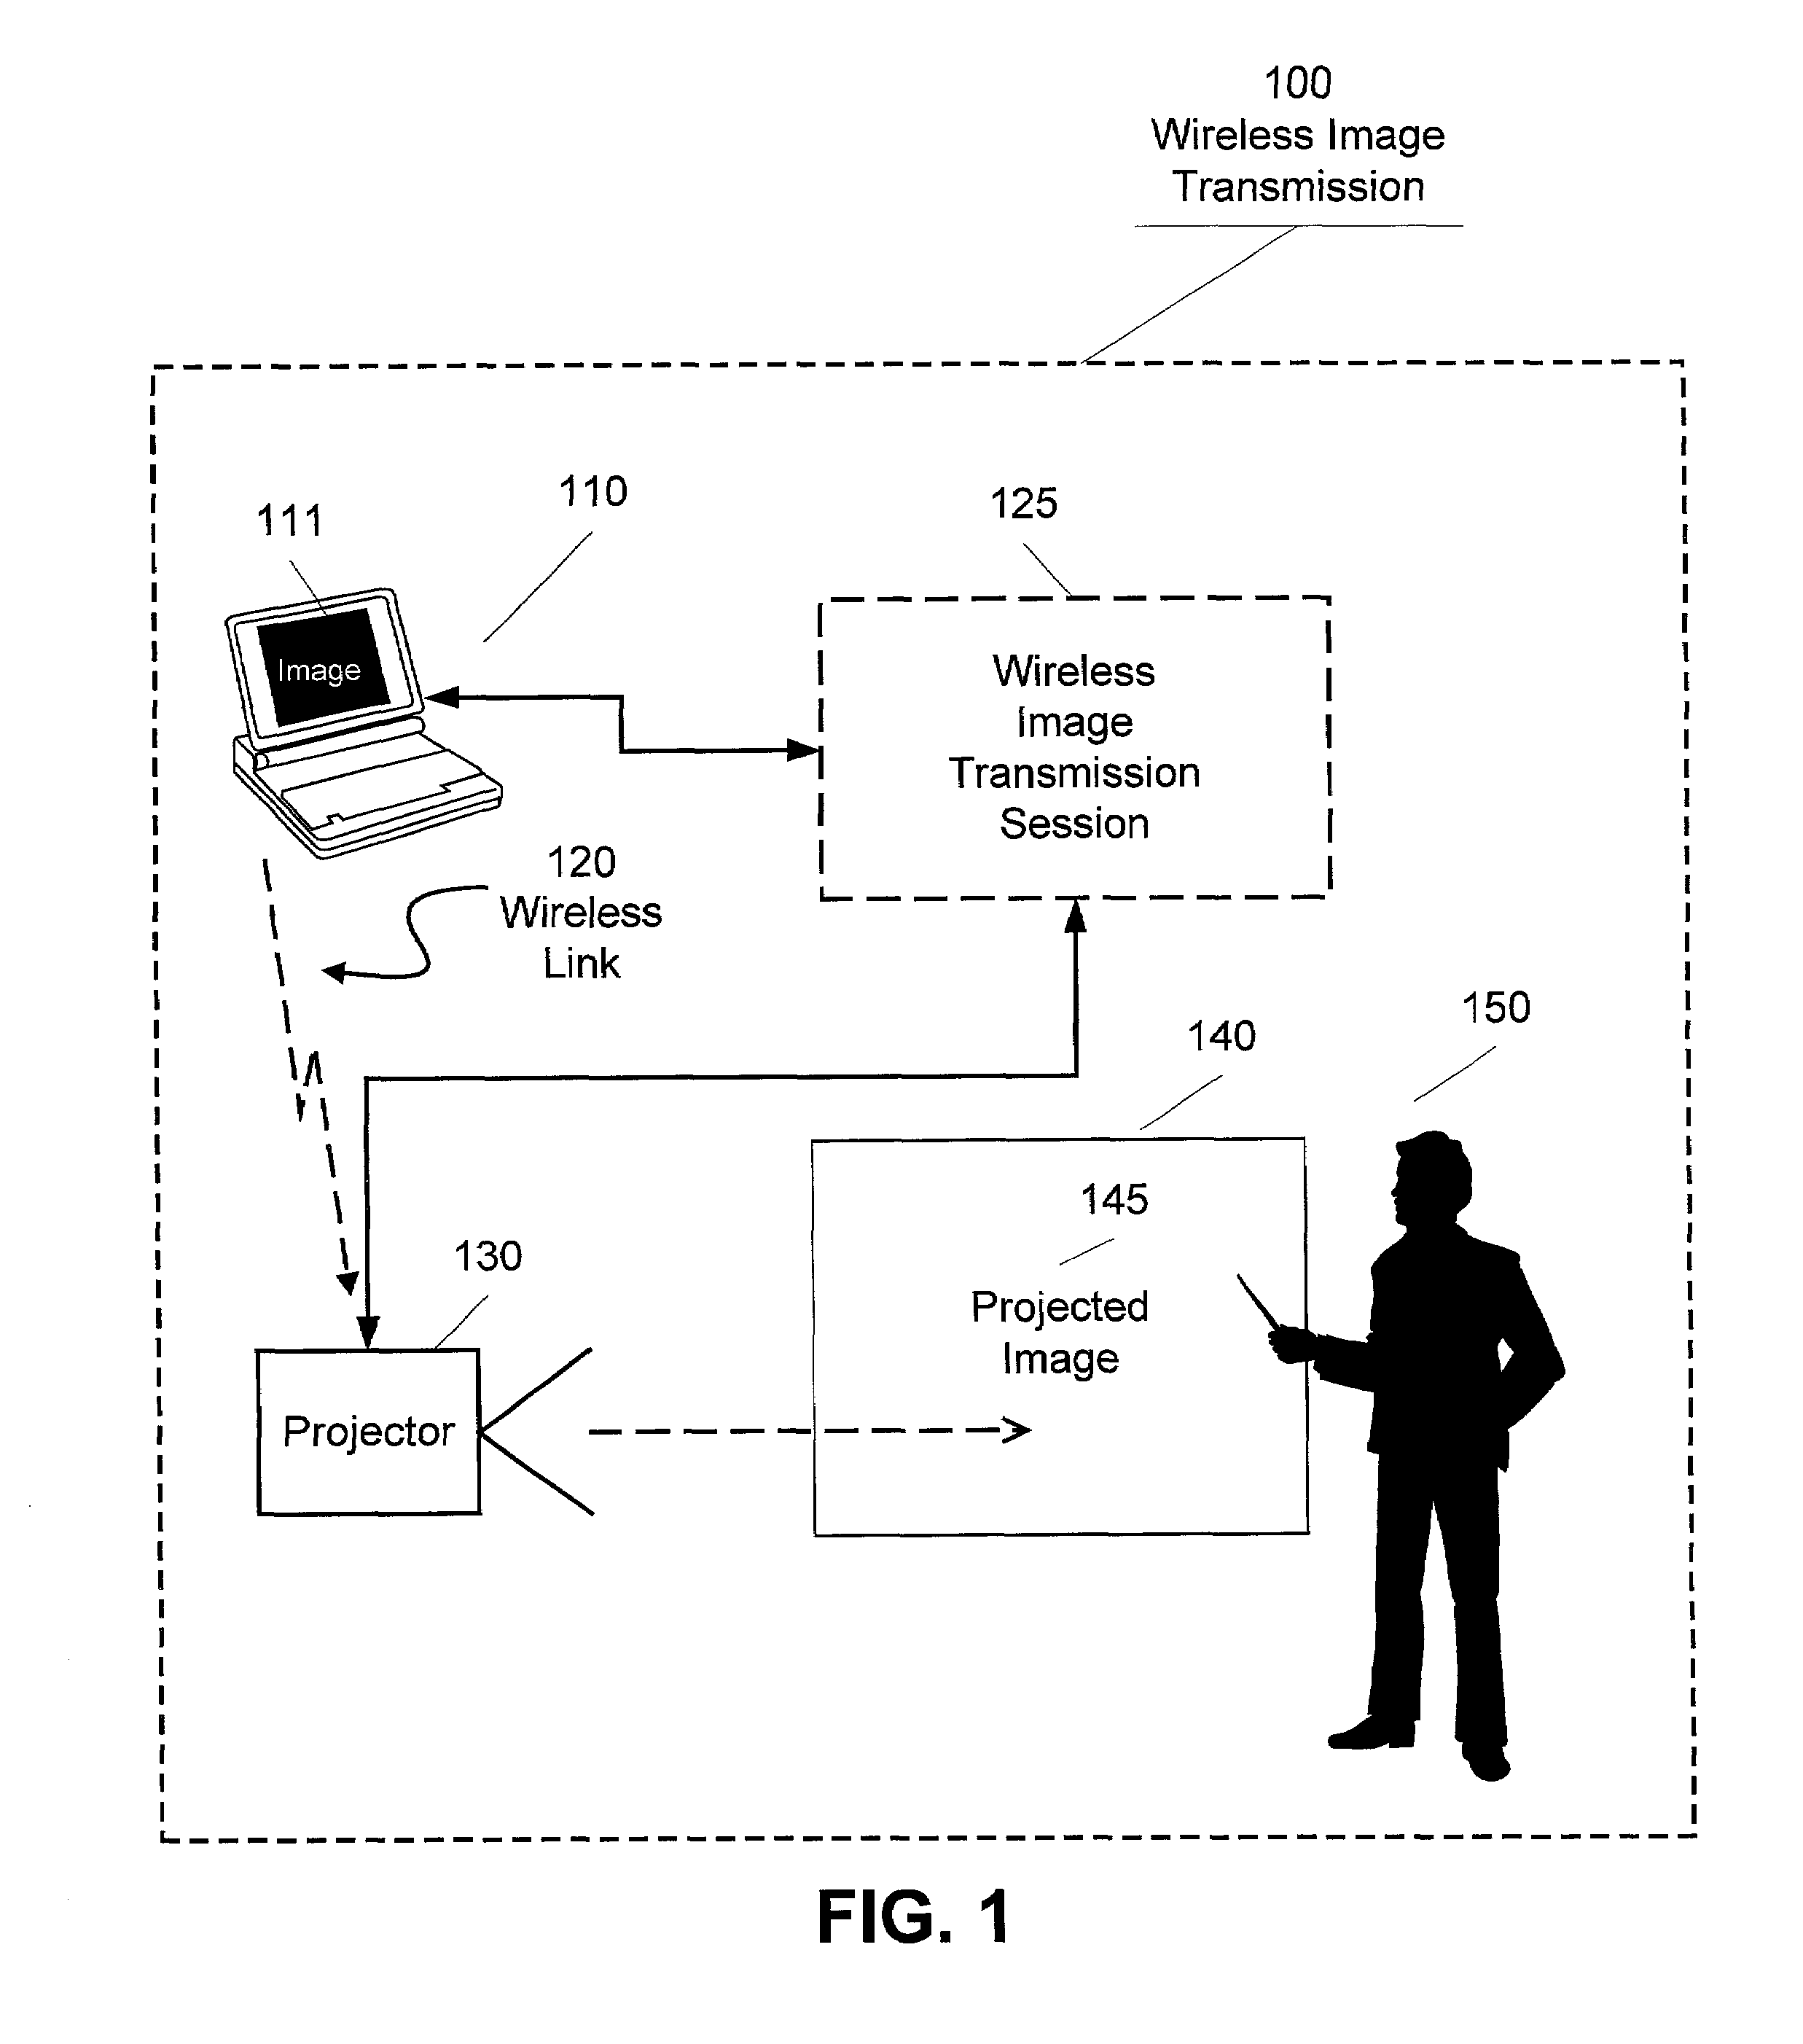 Method and apparatus for wireless image transmission to a projector